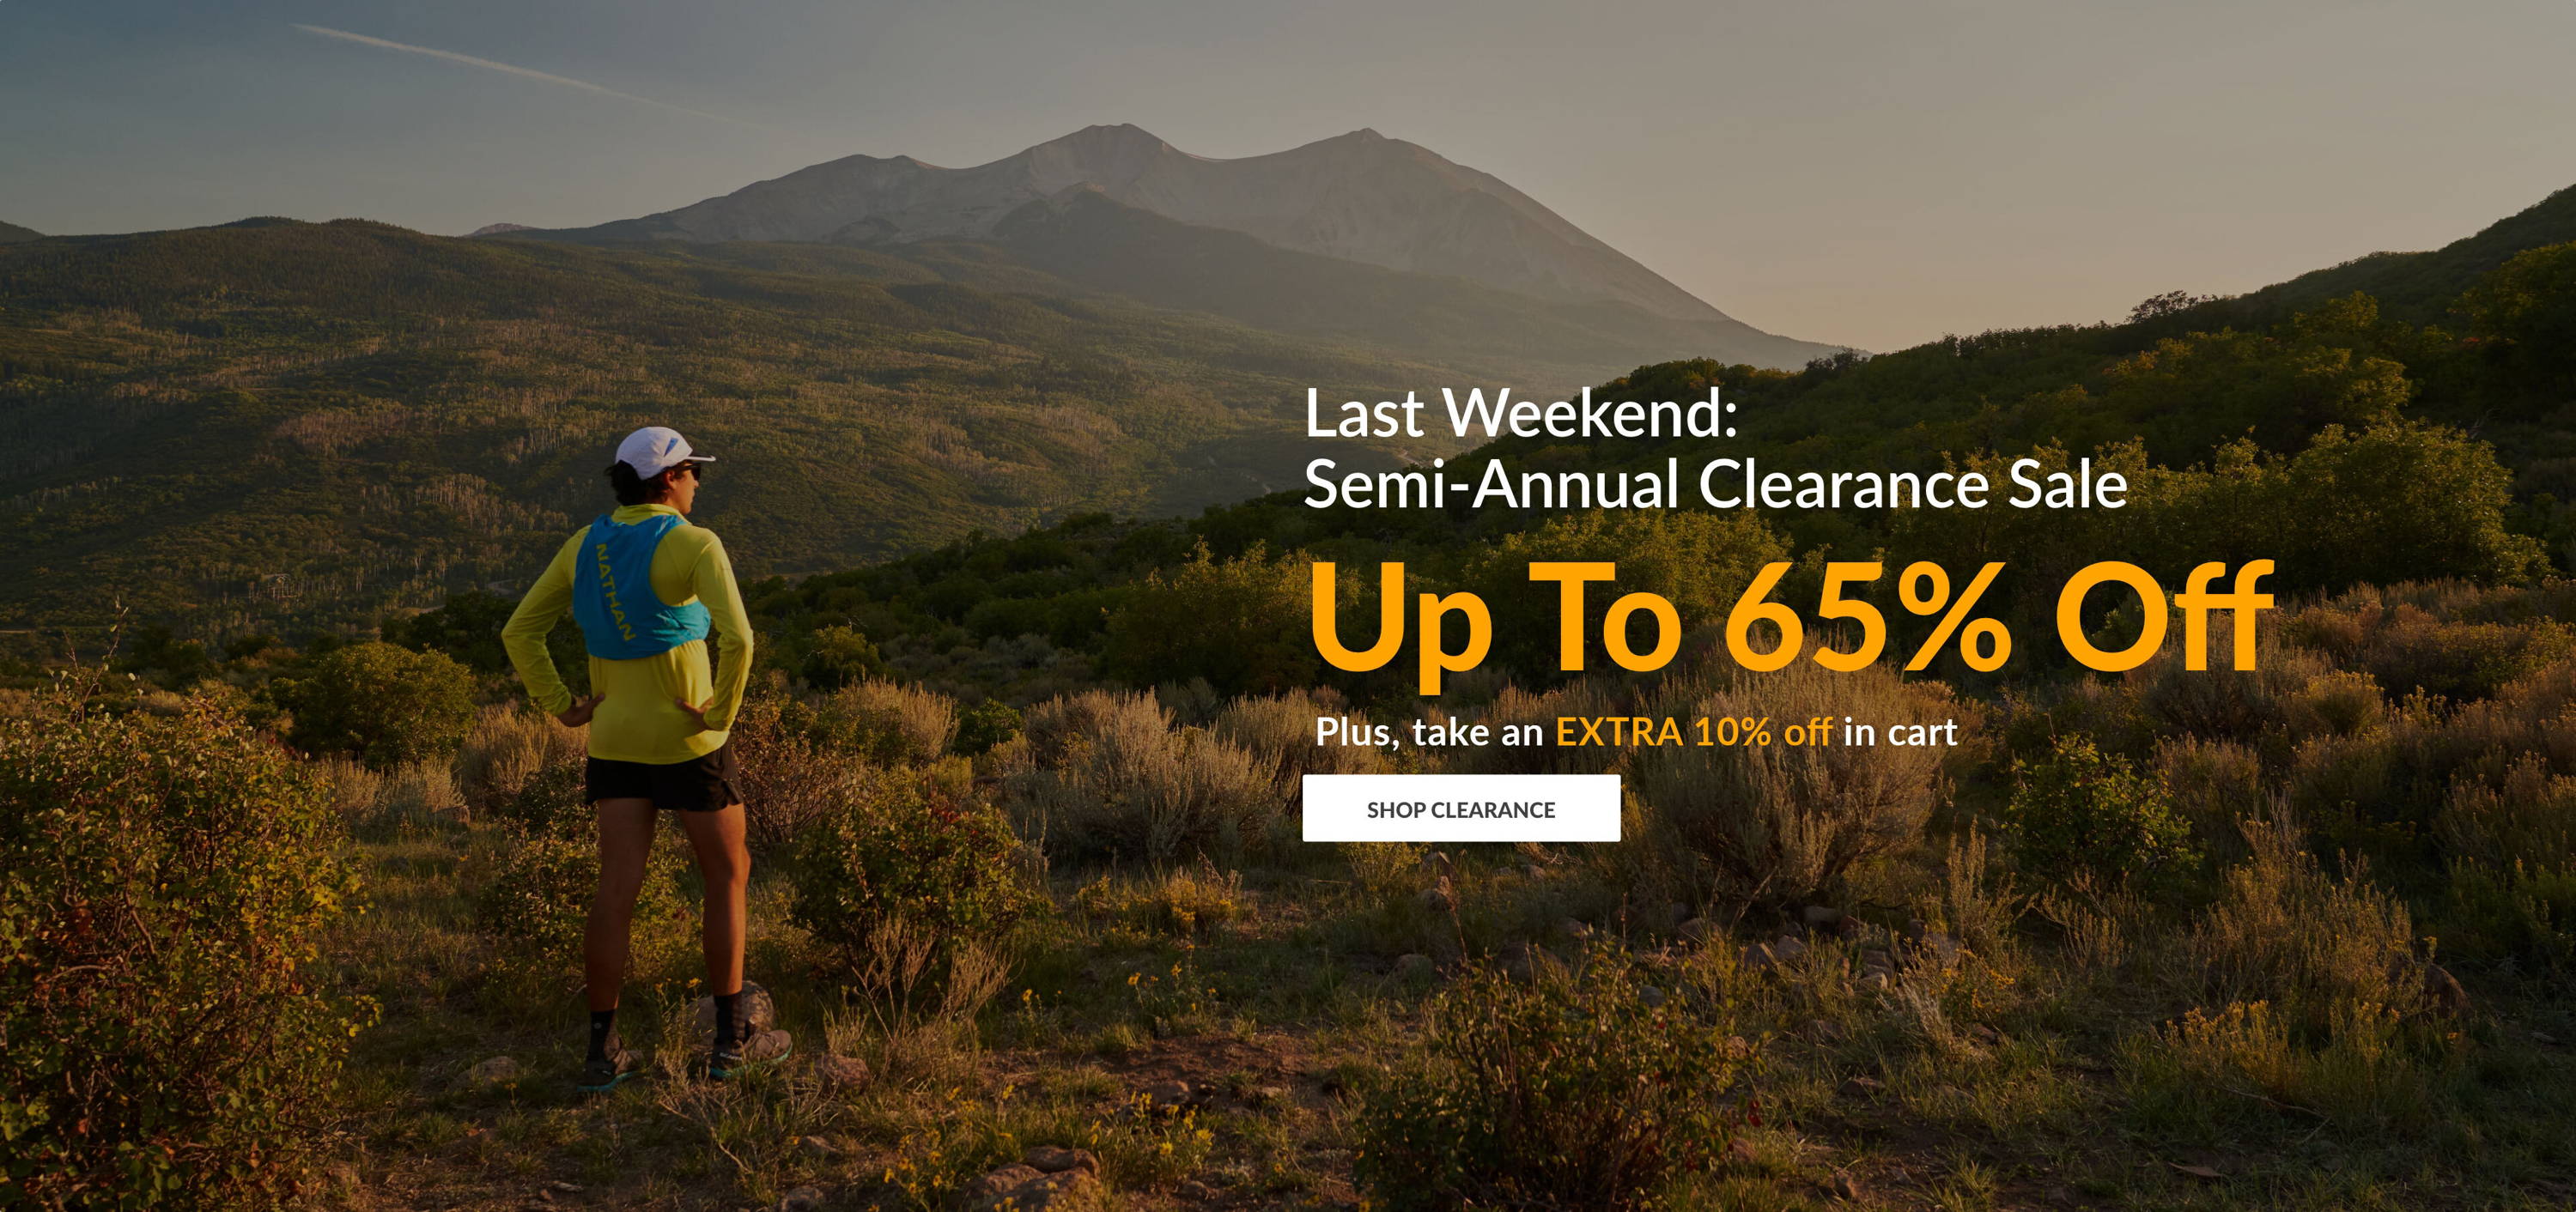 Last Weekend: Semi-Annual Clearance Sale. up to 65% Off. Plus, take an EXTRA 10% off in cart